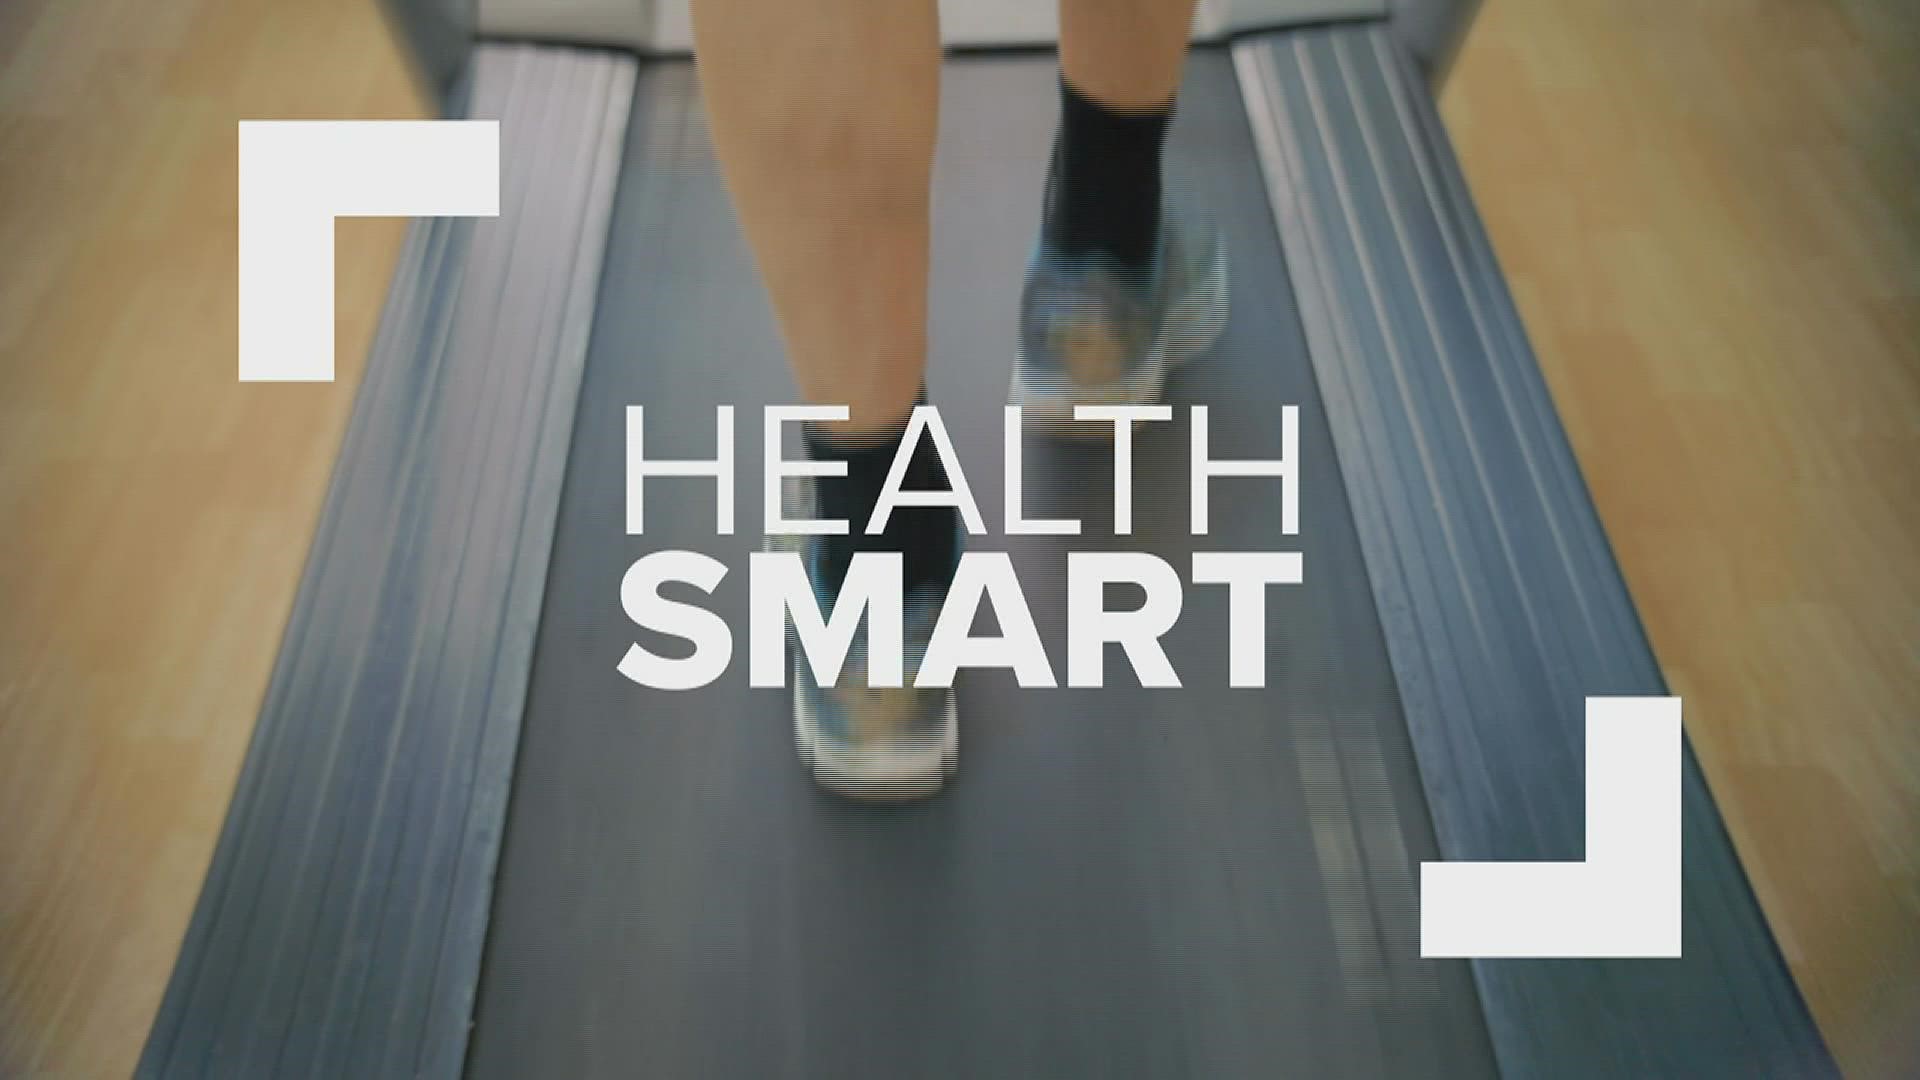 A look at three of the top health stories in the news from the week to keep you Health Smart.